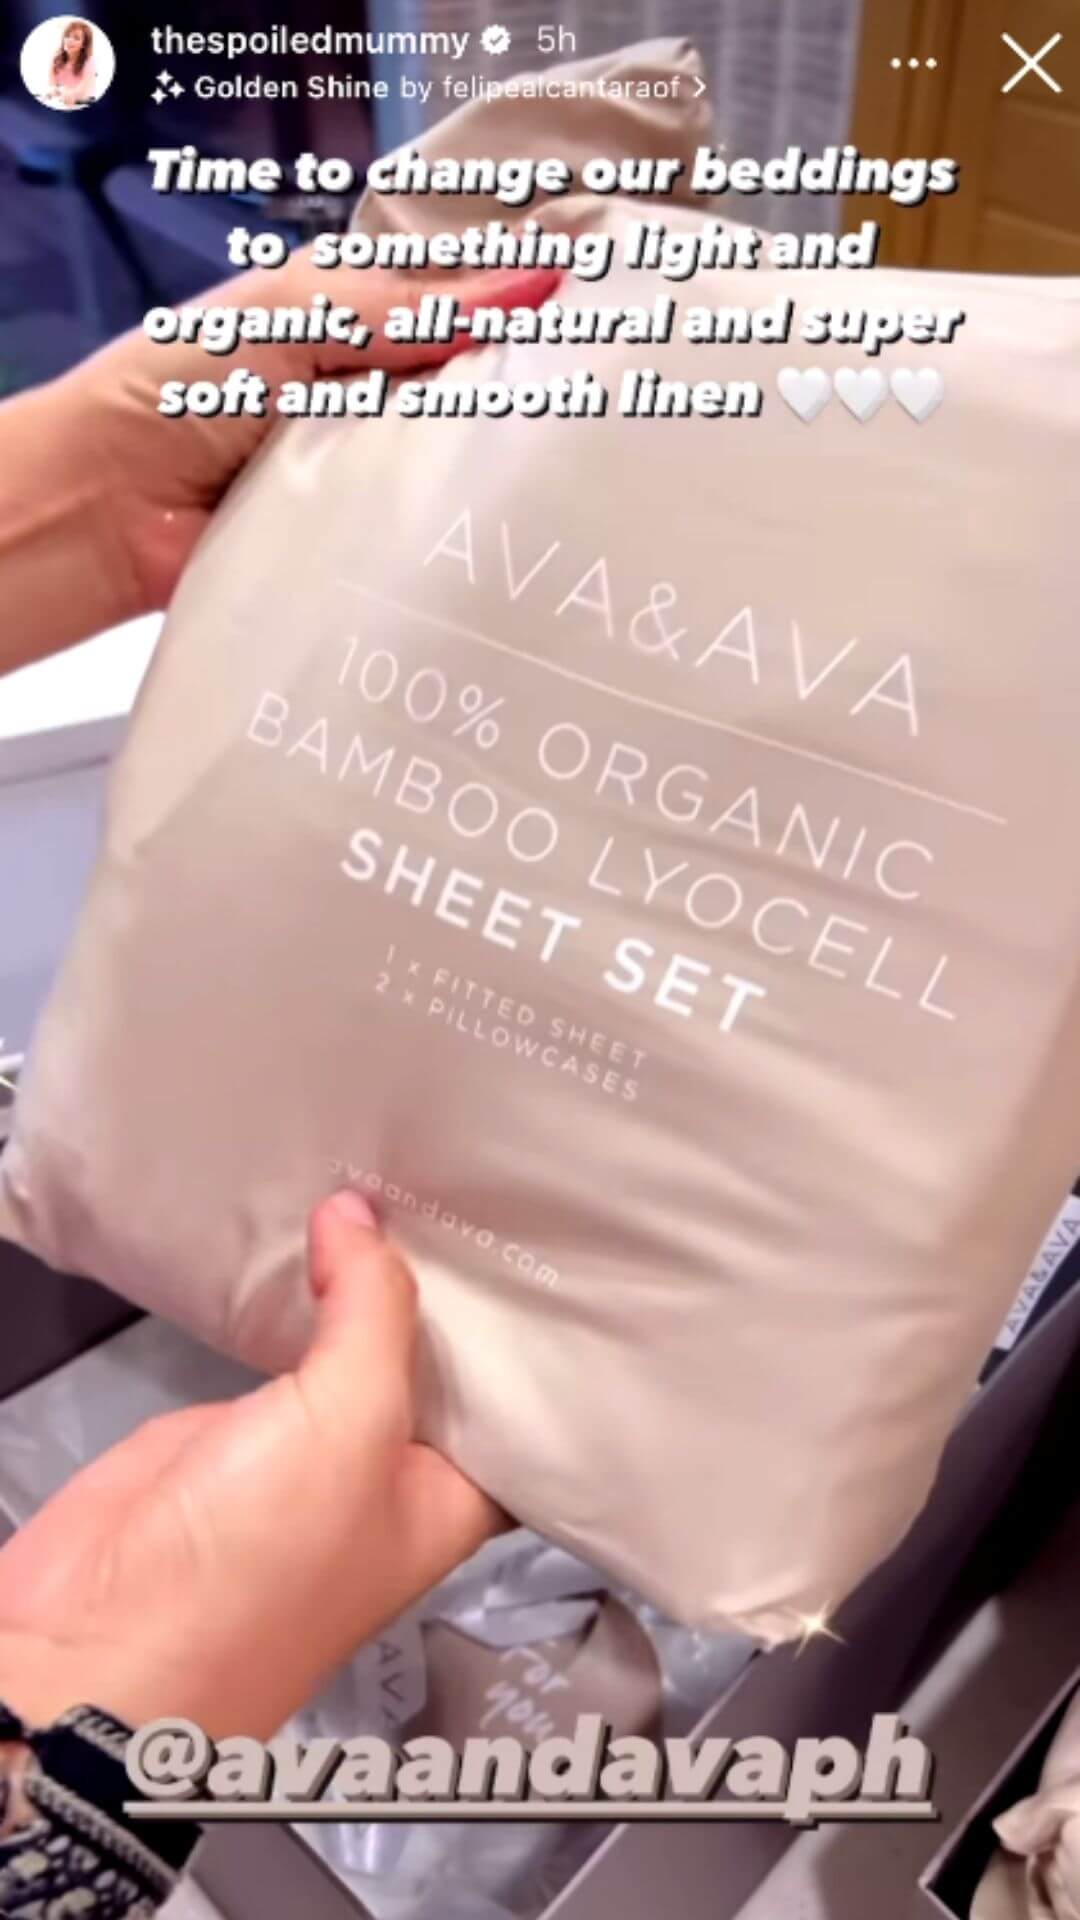 ava and ava ph review - cooling silky soft organic bamboo lyocell beddings, duvet cover for summer (in sandshell beige) by thespoiledmummy (grace barbers baja)